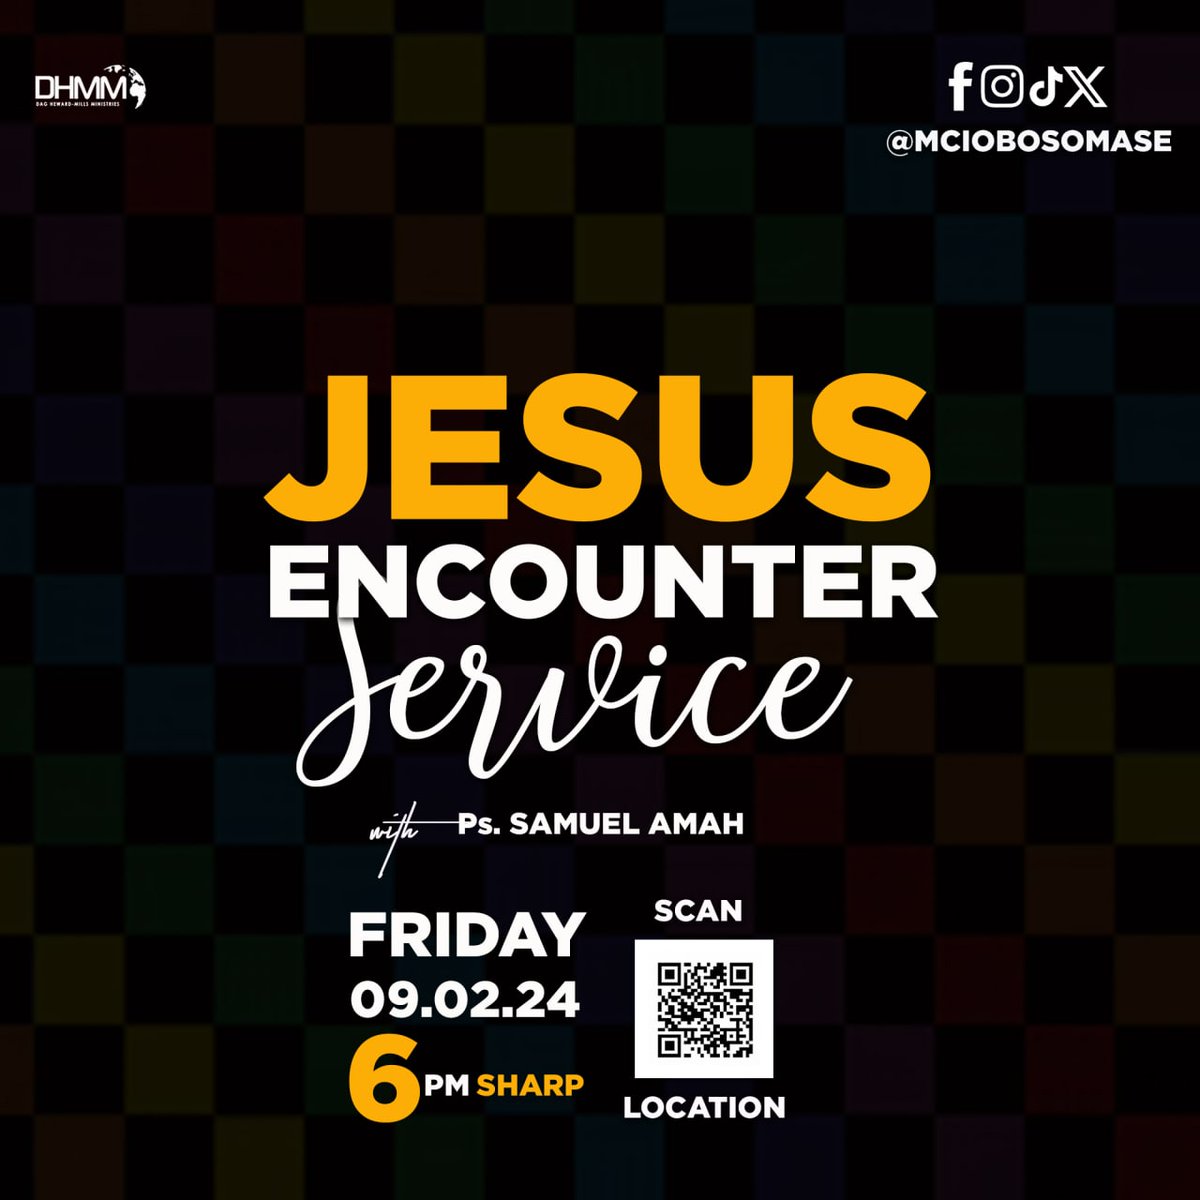 Together, we are growing in the Lord. Come and experience the sincere milk of the word tomorrow night. These teachings are sure to turn your life around. 

#JesusEncounterService 
#MCI_OBOSOMASE